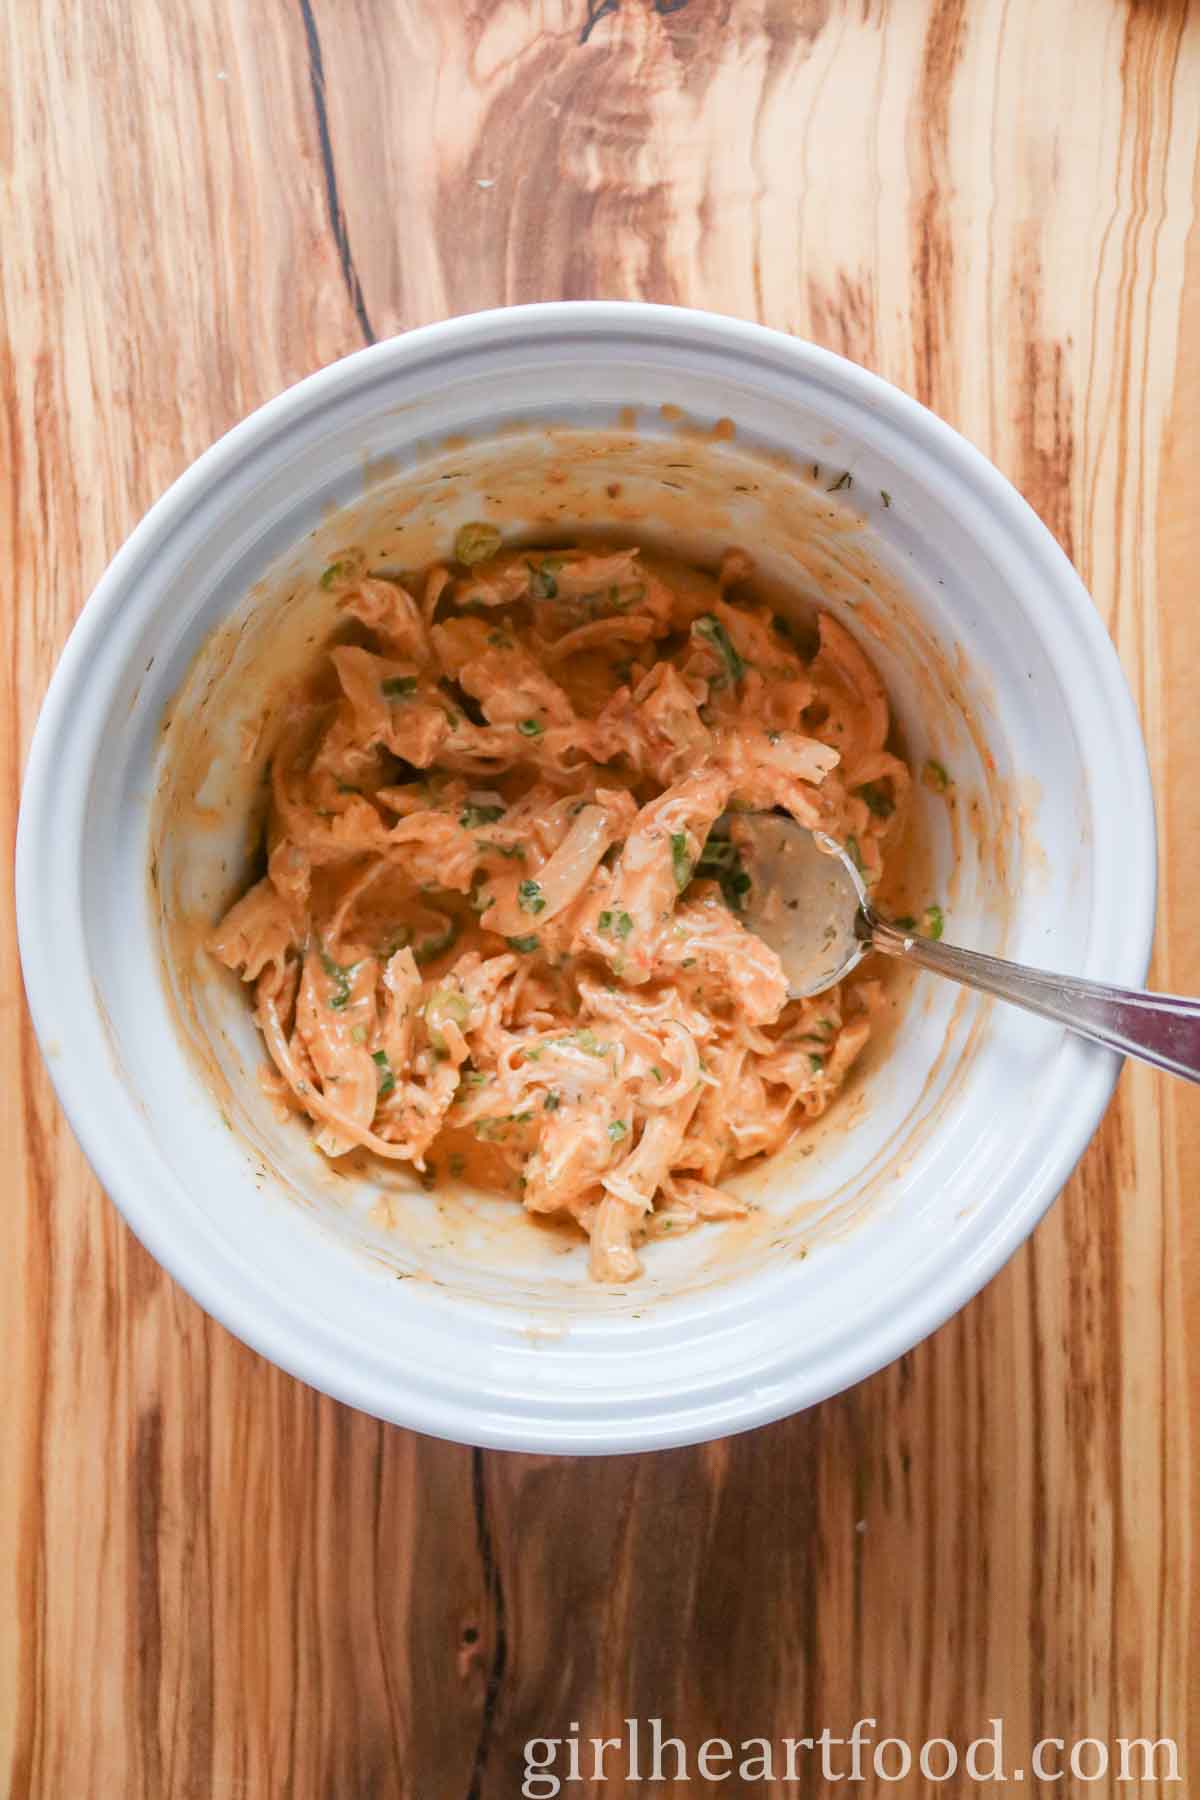 Buffalo chicken salad in a white bowl, with a spoon resting in the mixture.